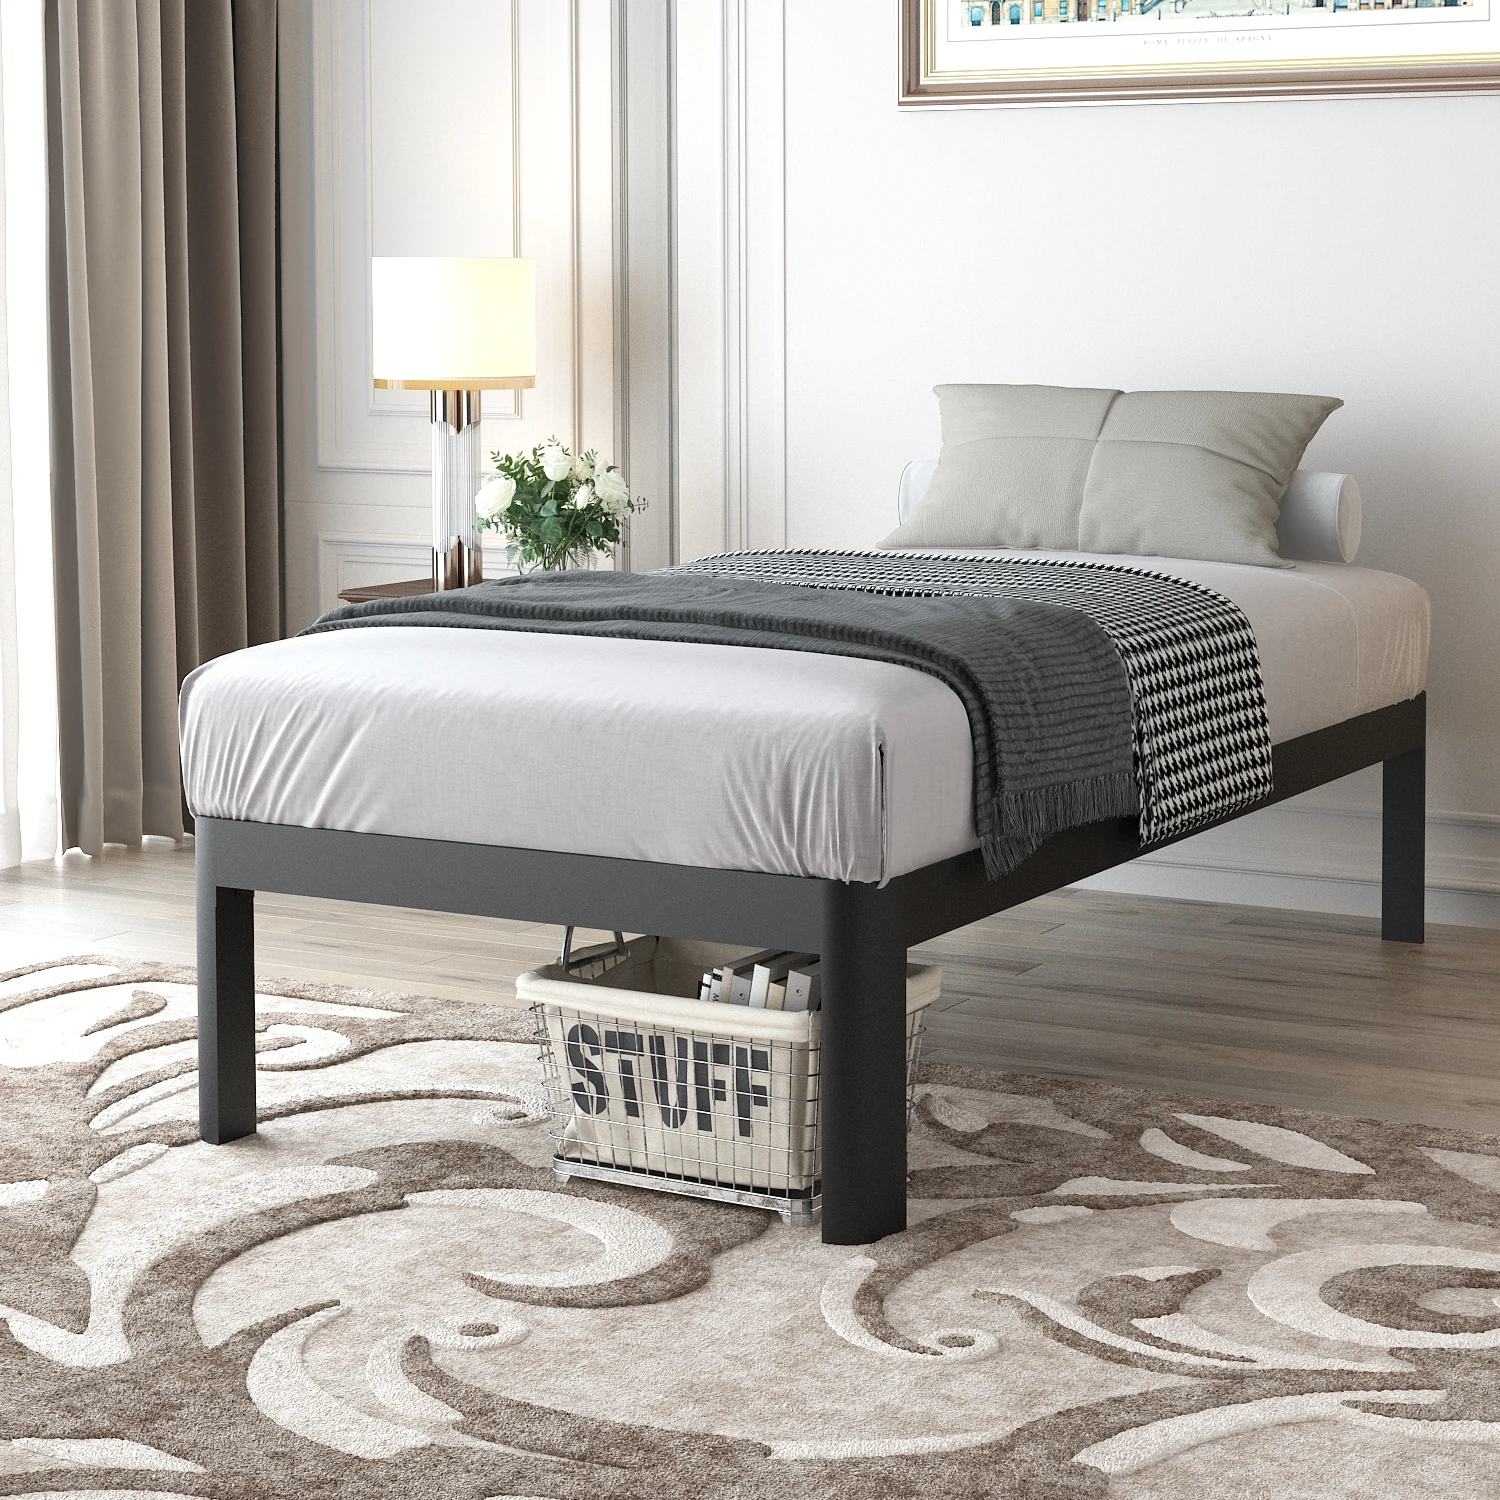 

Billy Bed Frame Twin Bed Frame With Rounded Edge Legs 14" Height 3500 Lb Heavy Duty Metal Platform Bed Frame Twin Size Metal Bed